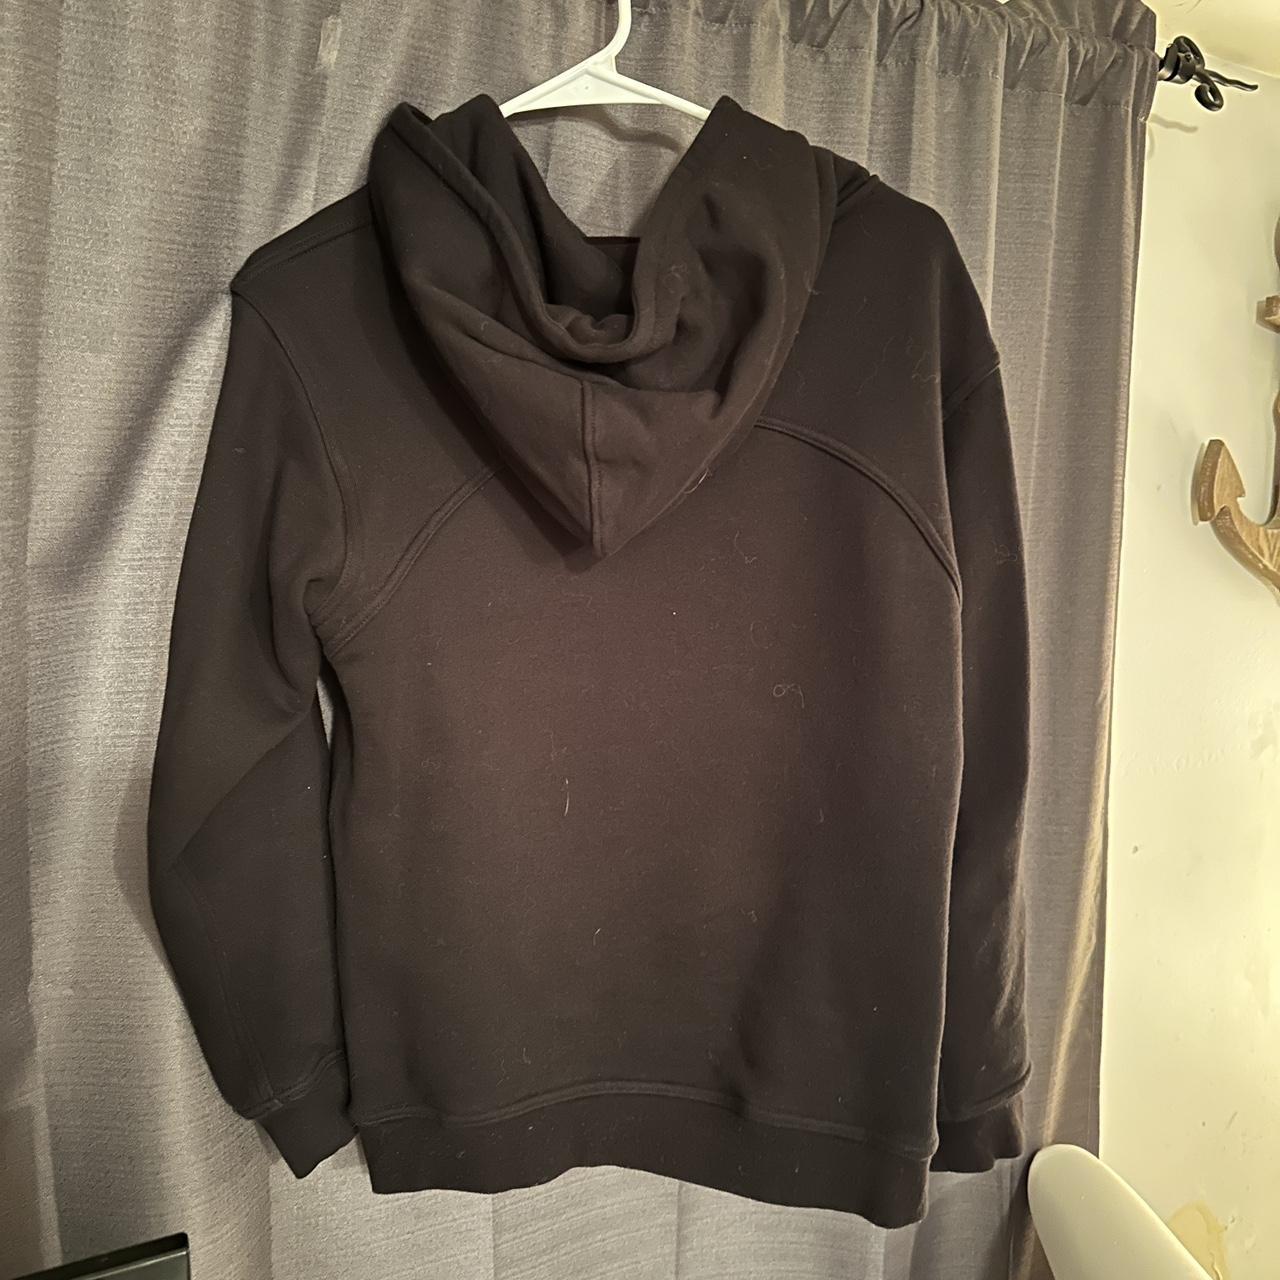 AYBL black hoodie Sorry about the cat fur I’ll get... - Depop